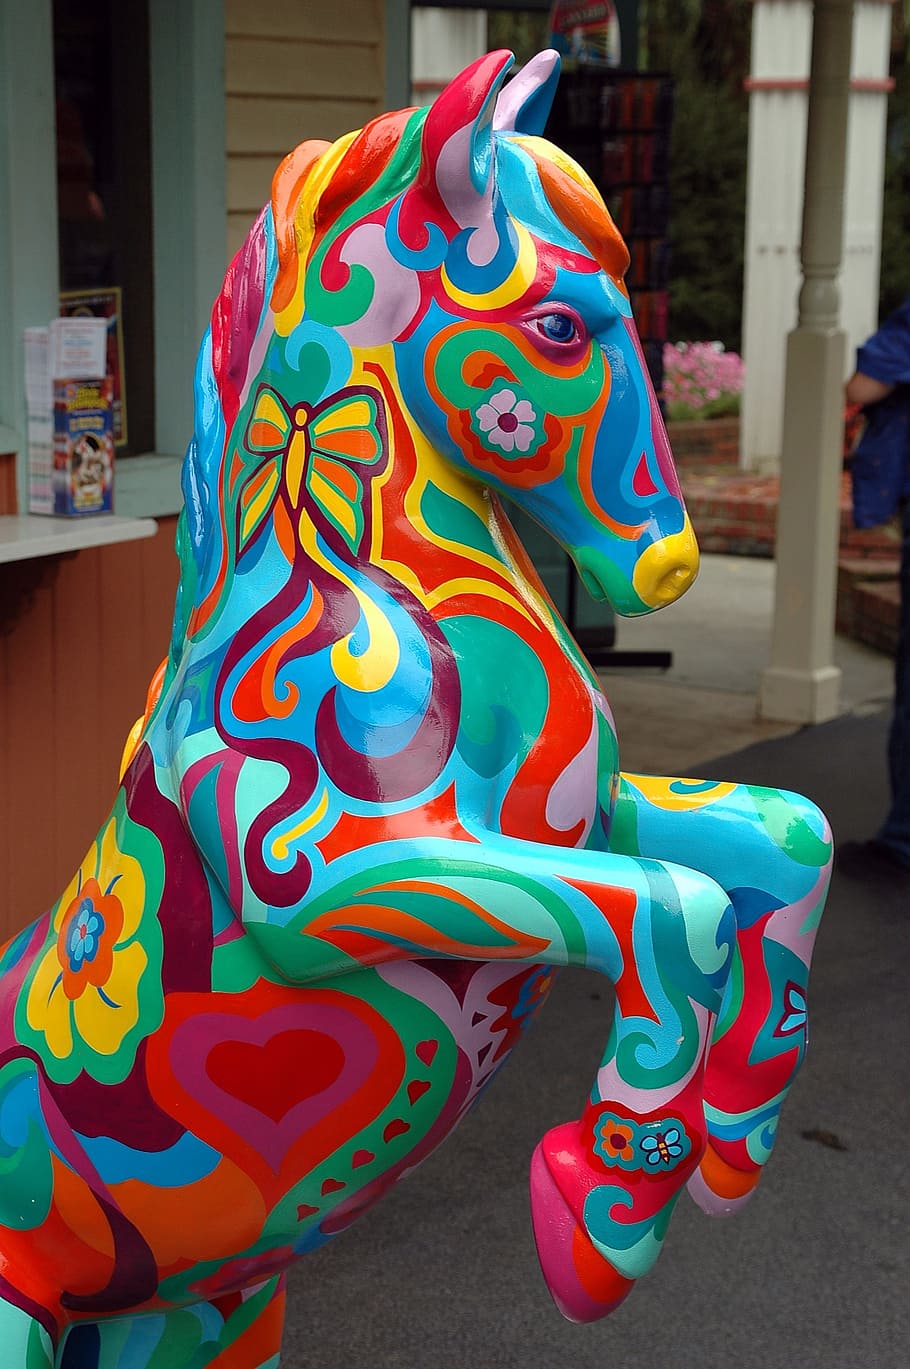 painted horse, artistic, colorful, horse, decoration, painted, color, head, traditional, decorative